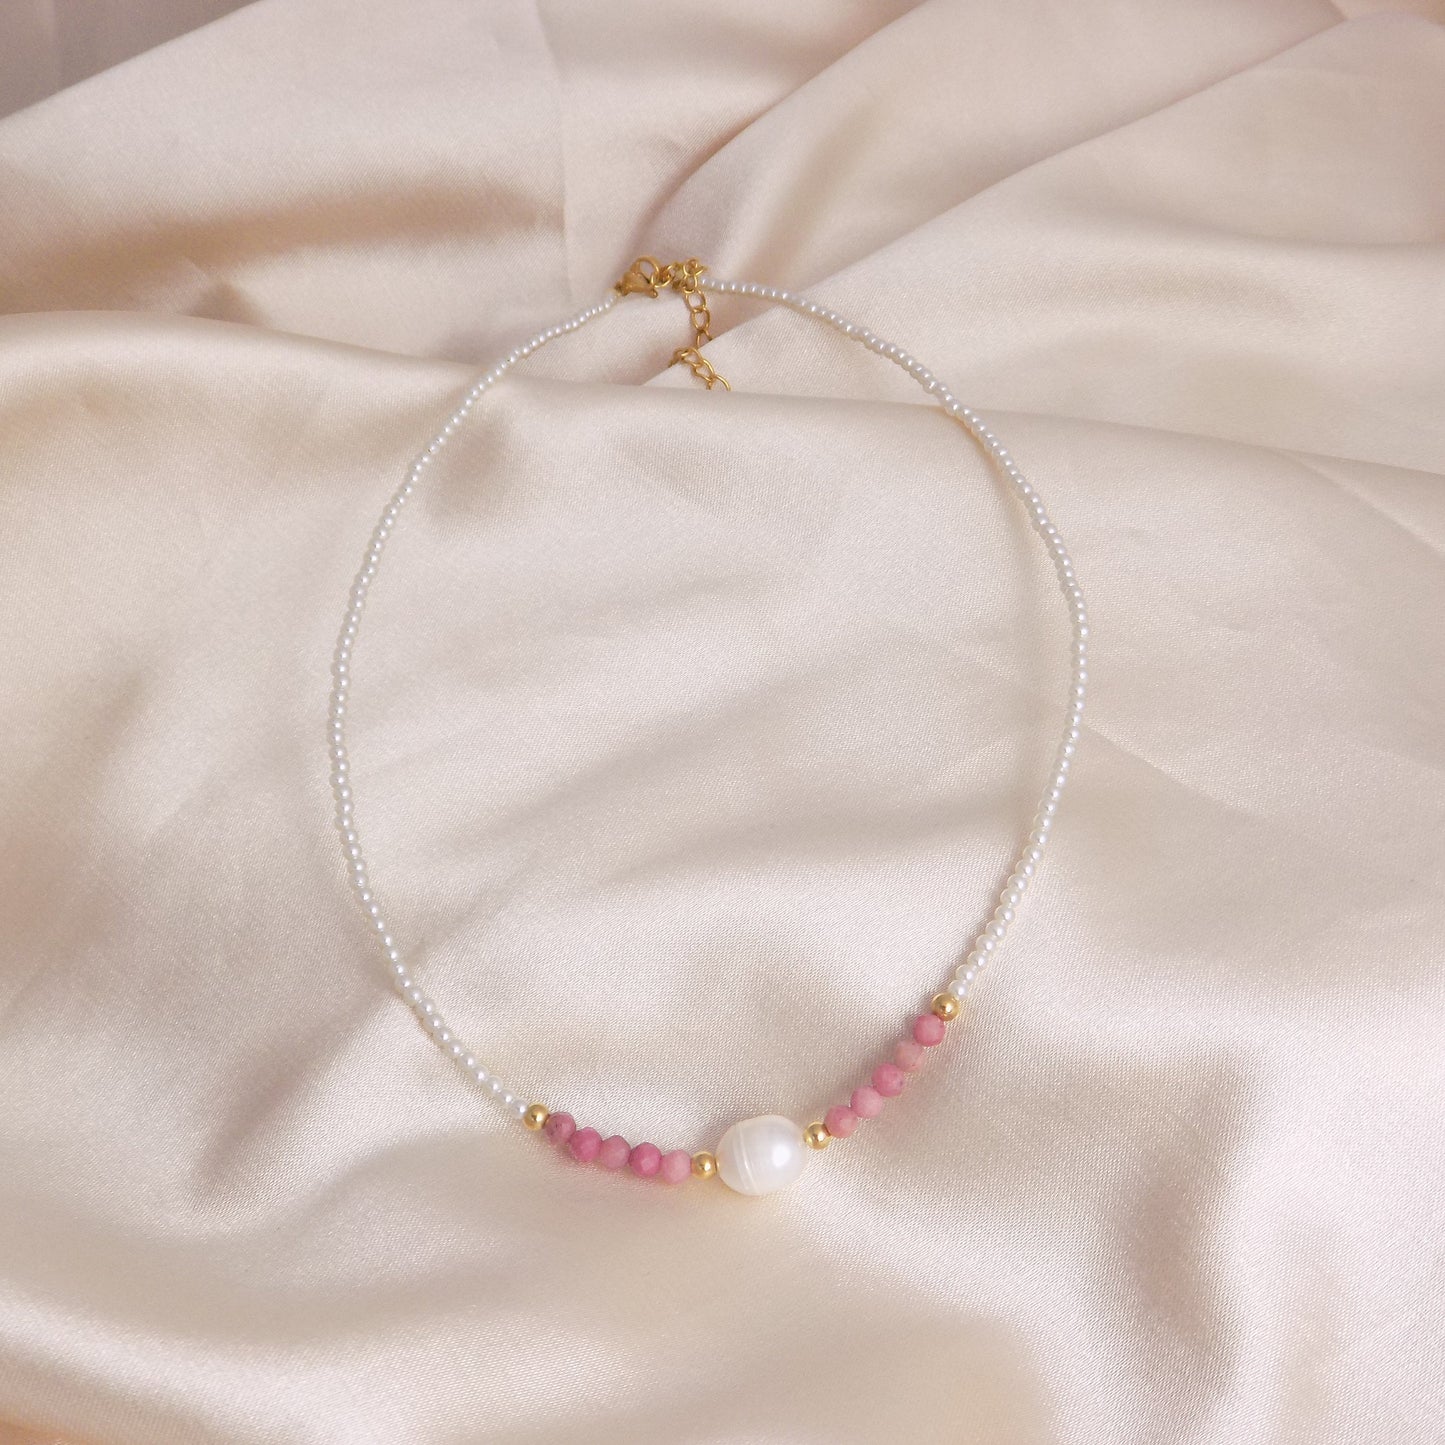 Dainty Pearl Choker Necklace Gold, Freshwater Pearl and Rhodochrosite Necklace, Christmas Gift For Her, M4-111